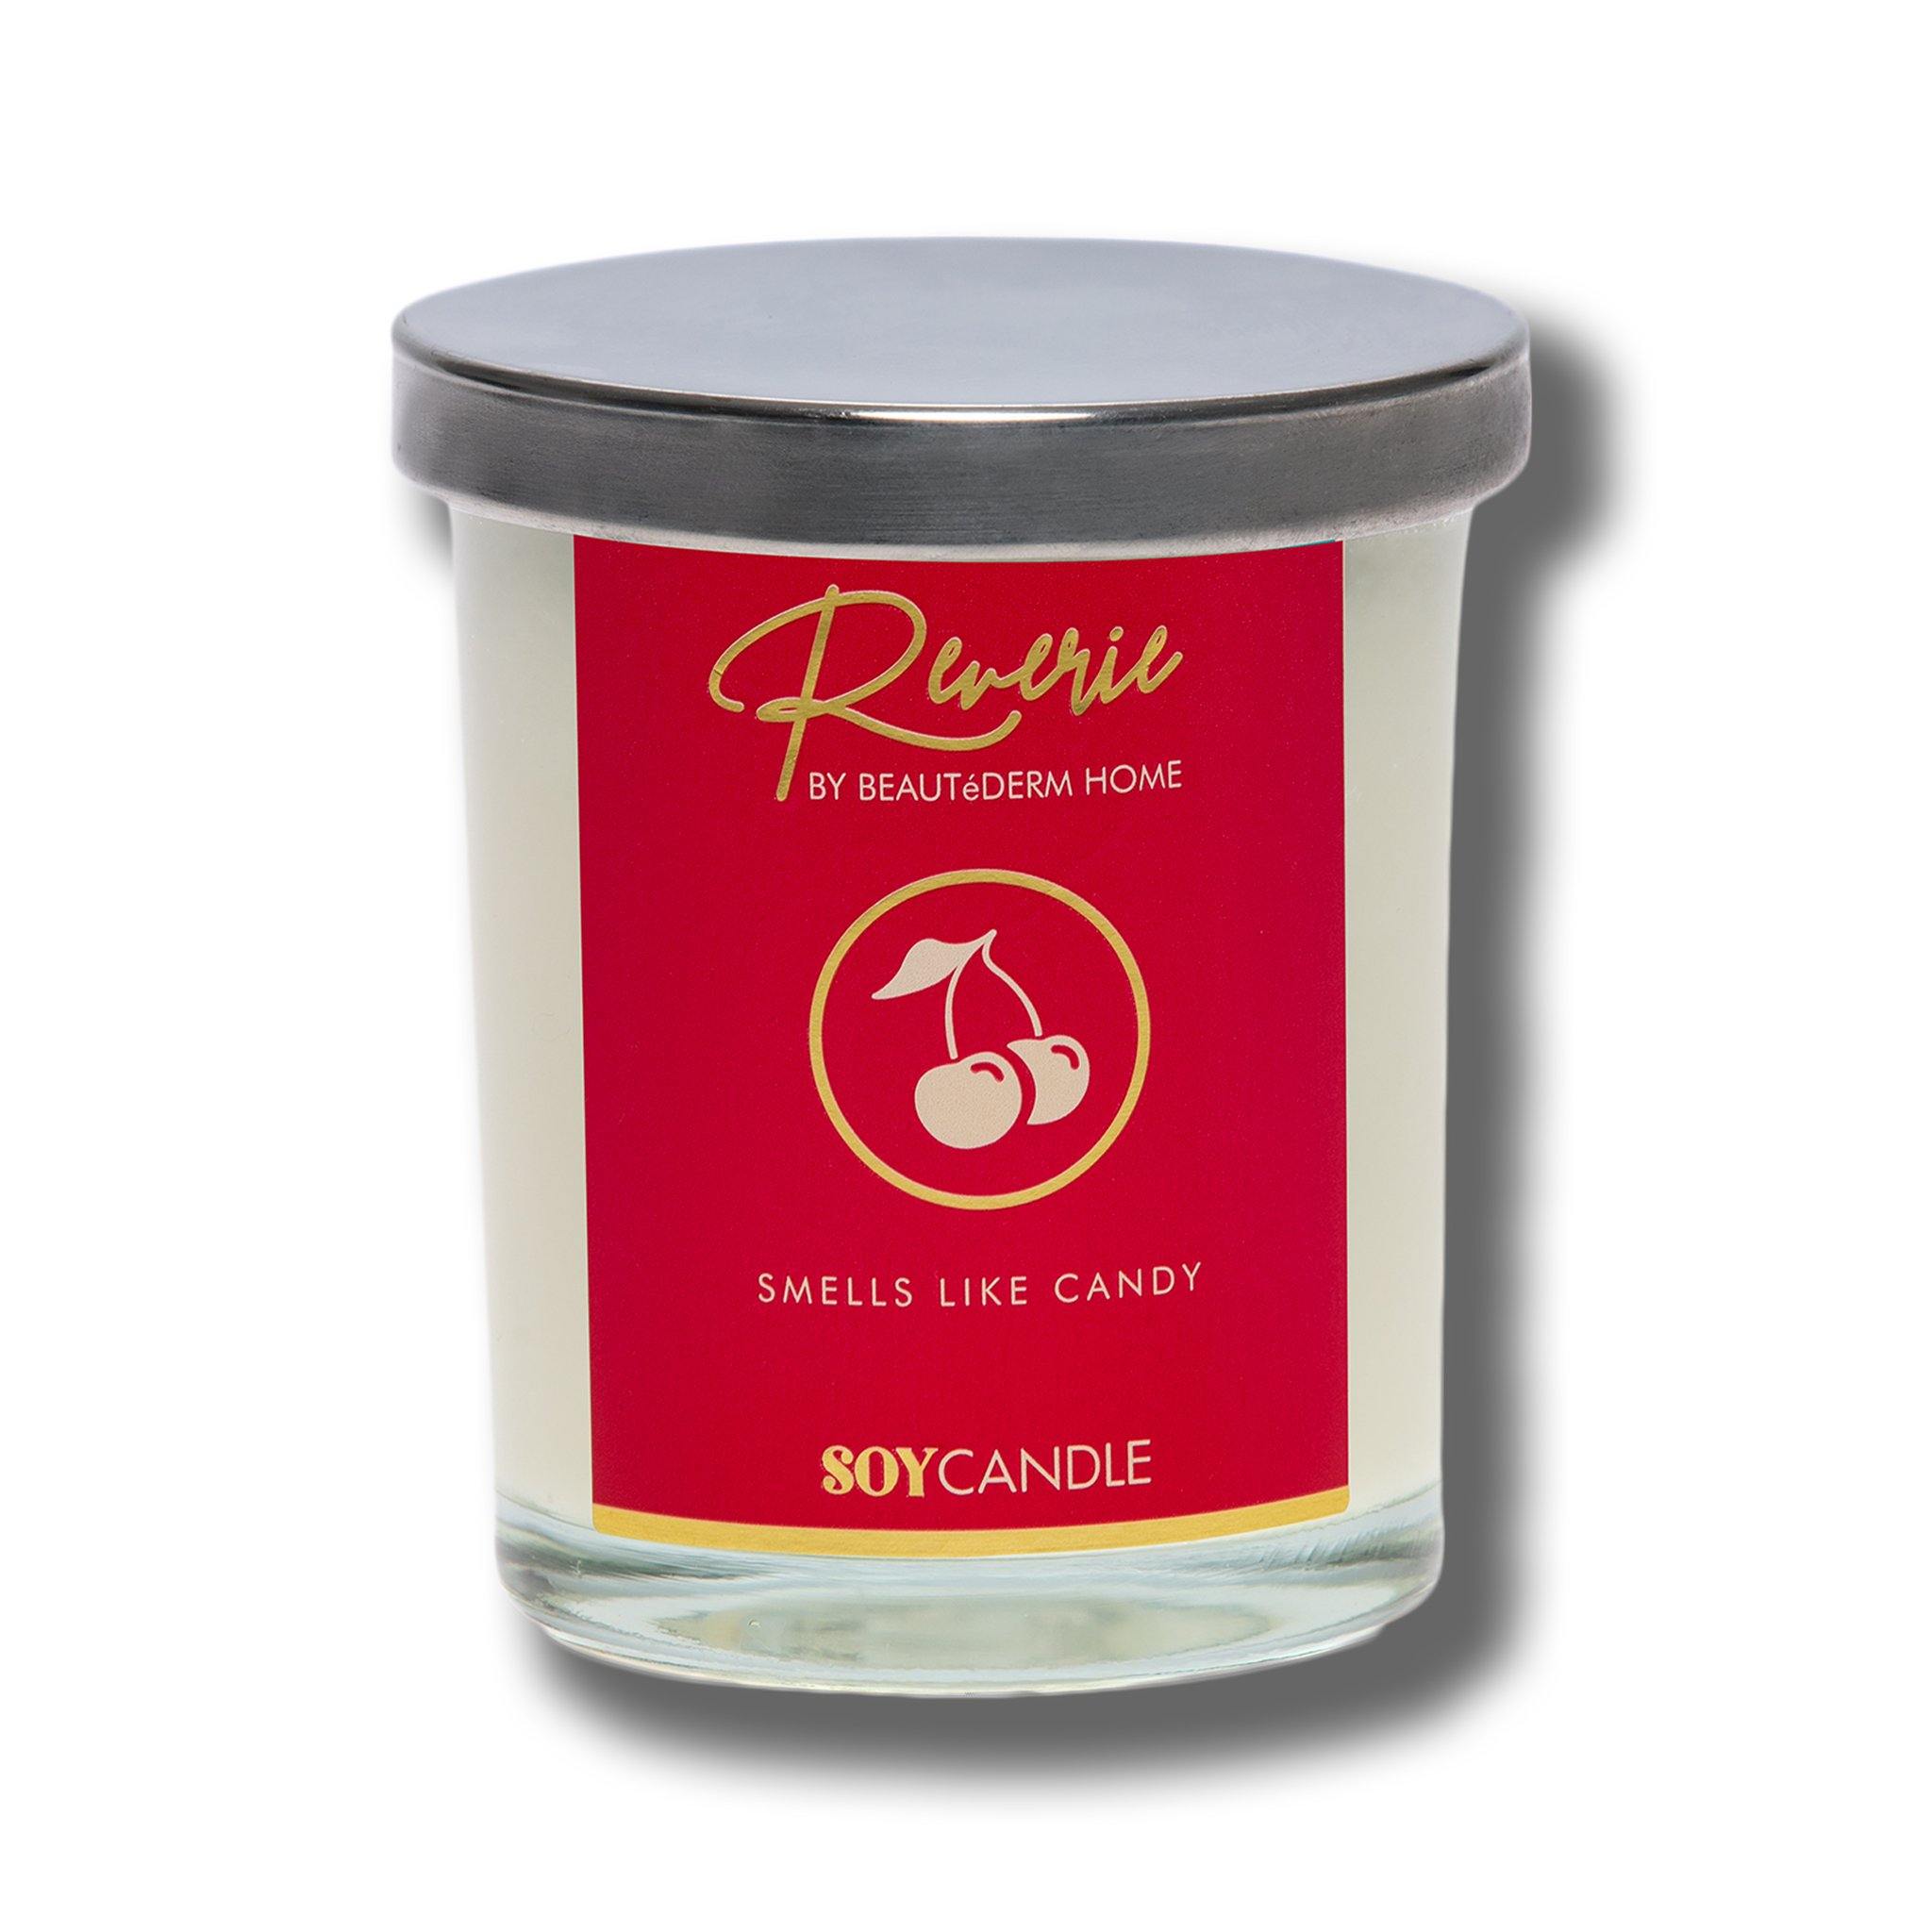 Soy Candle, Smells Like Candy (Cherry Scent), Reverie  by Beautederm Home